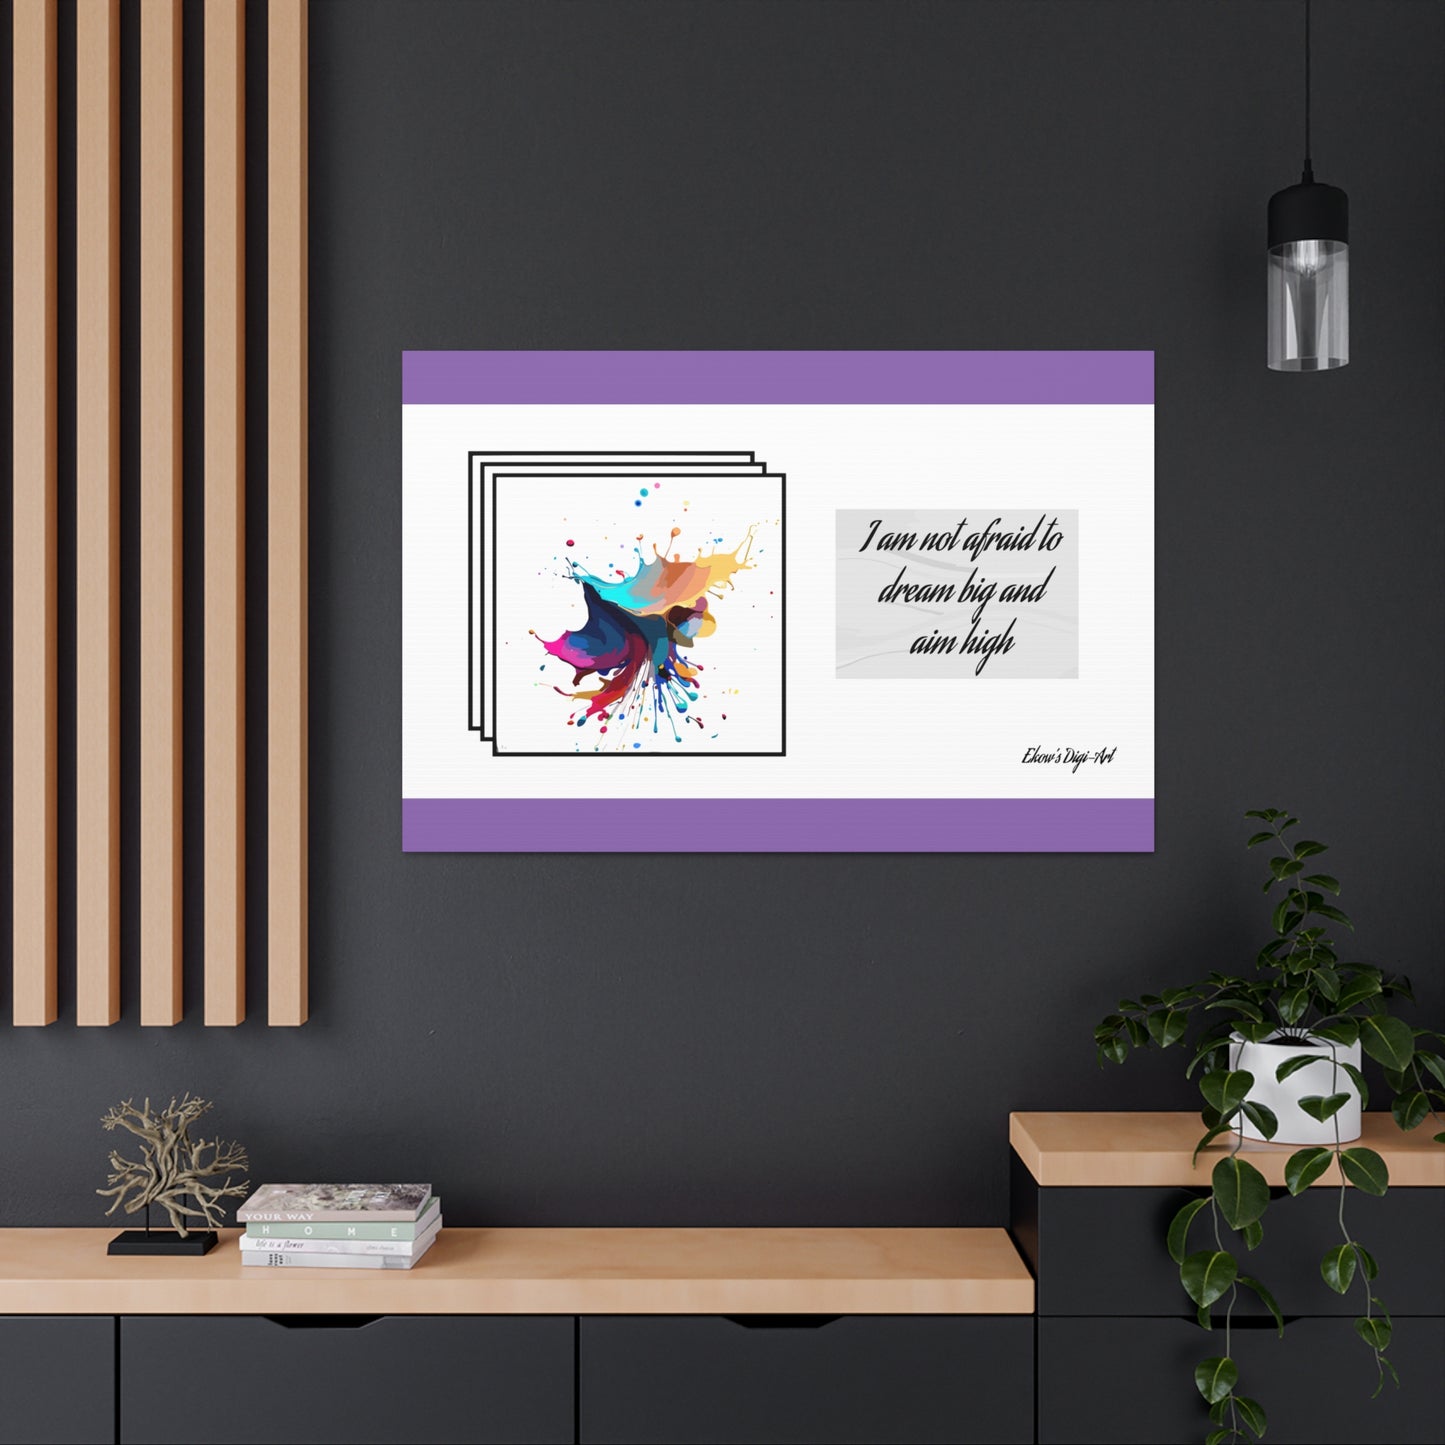 Bastion of Bliss - Affirmation Wall Art